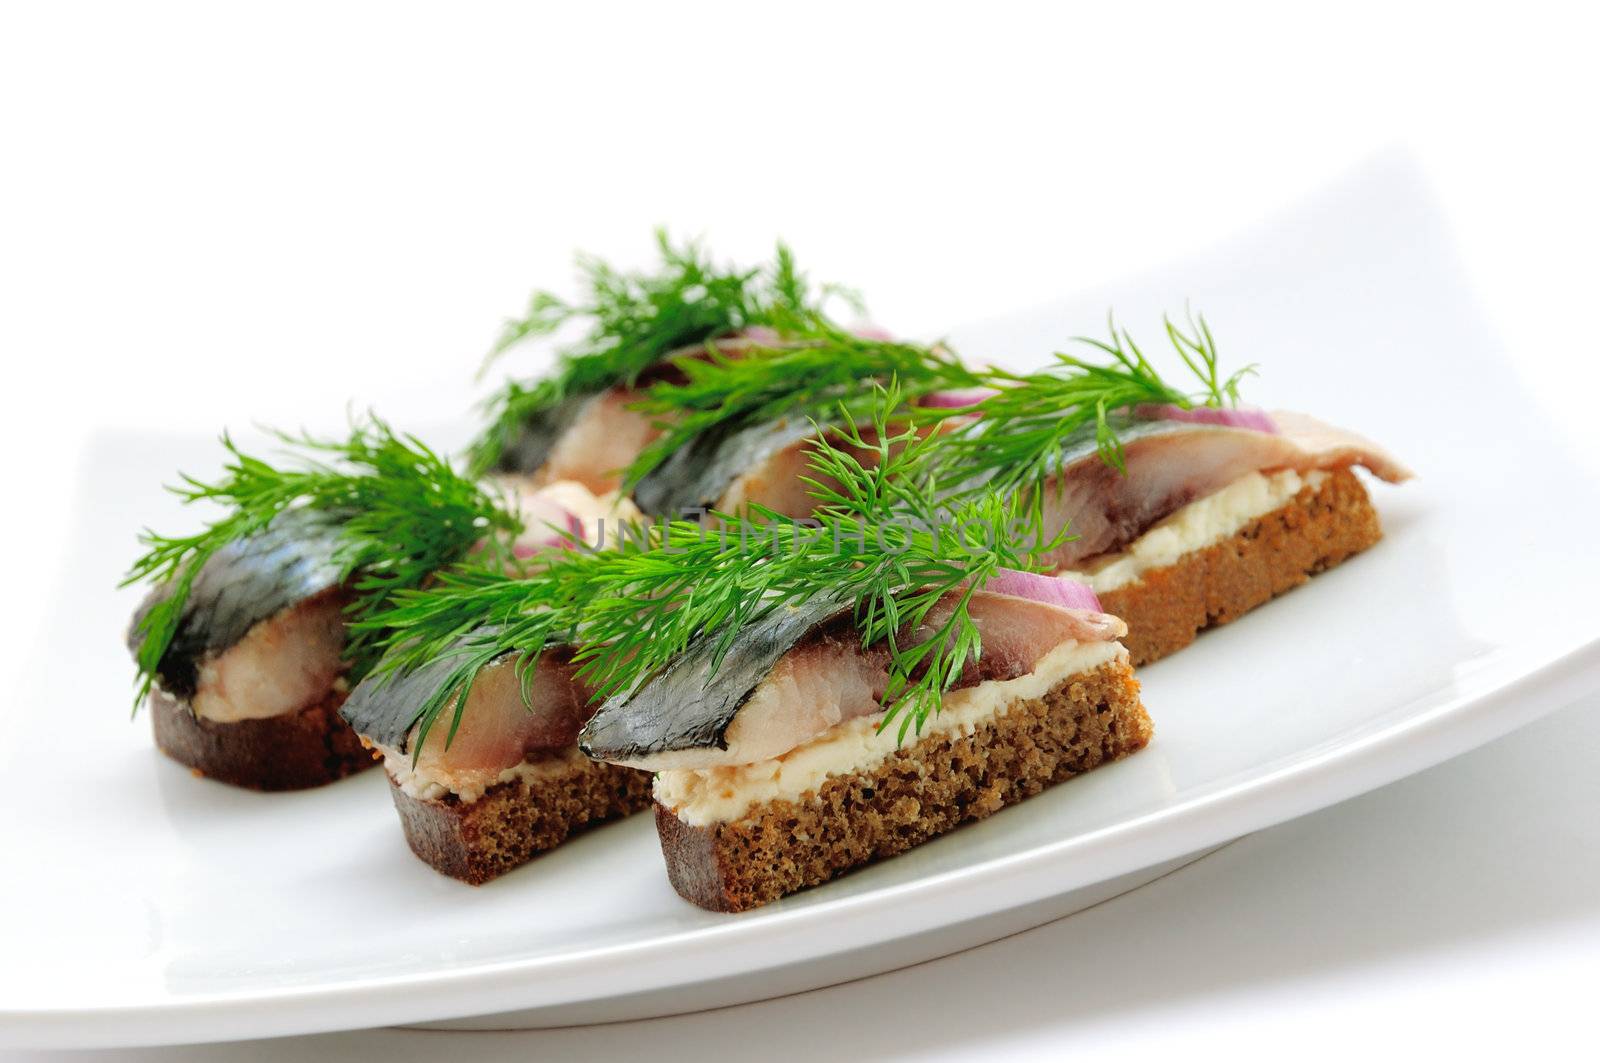 Sandwiches of rye bread with herring, onions and herbs. by Apolonia